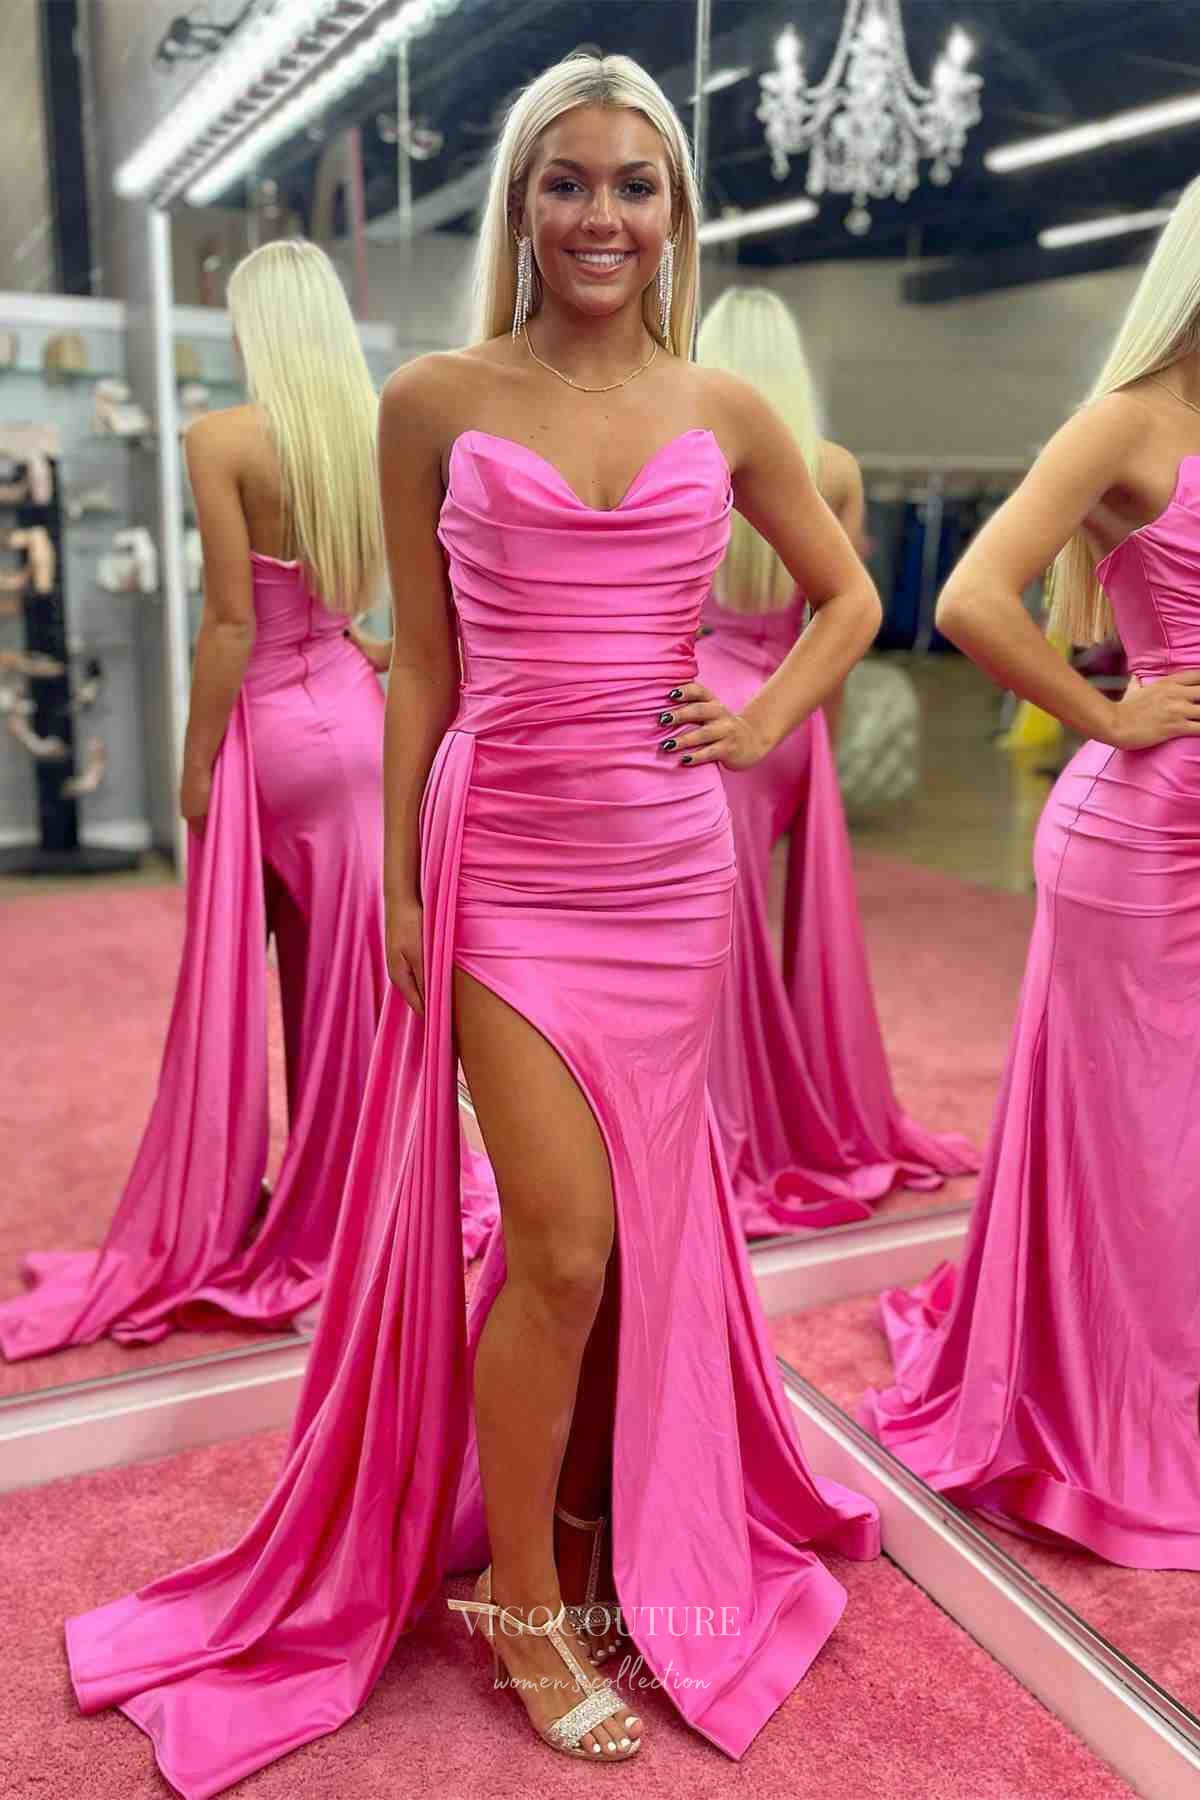 Hot Pink Pleated Satin Mermaid Prom Dresses with Slit Overskirt 24224-Prom Dresses-vigocouture-Hot Pink-Custom Size-vigocouture